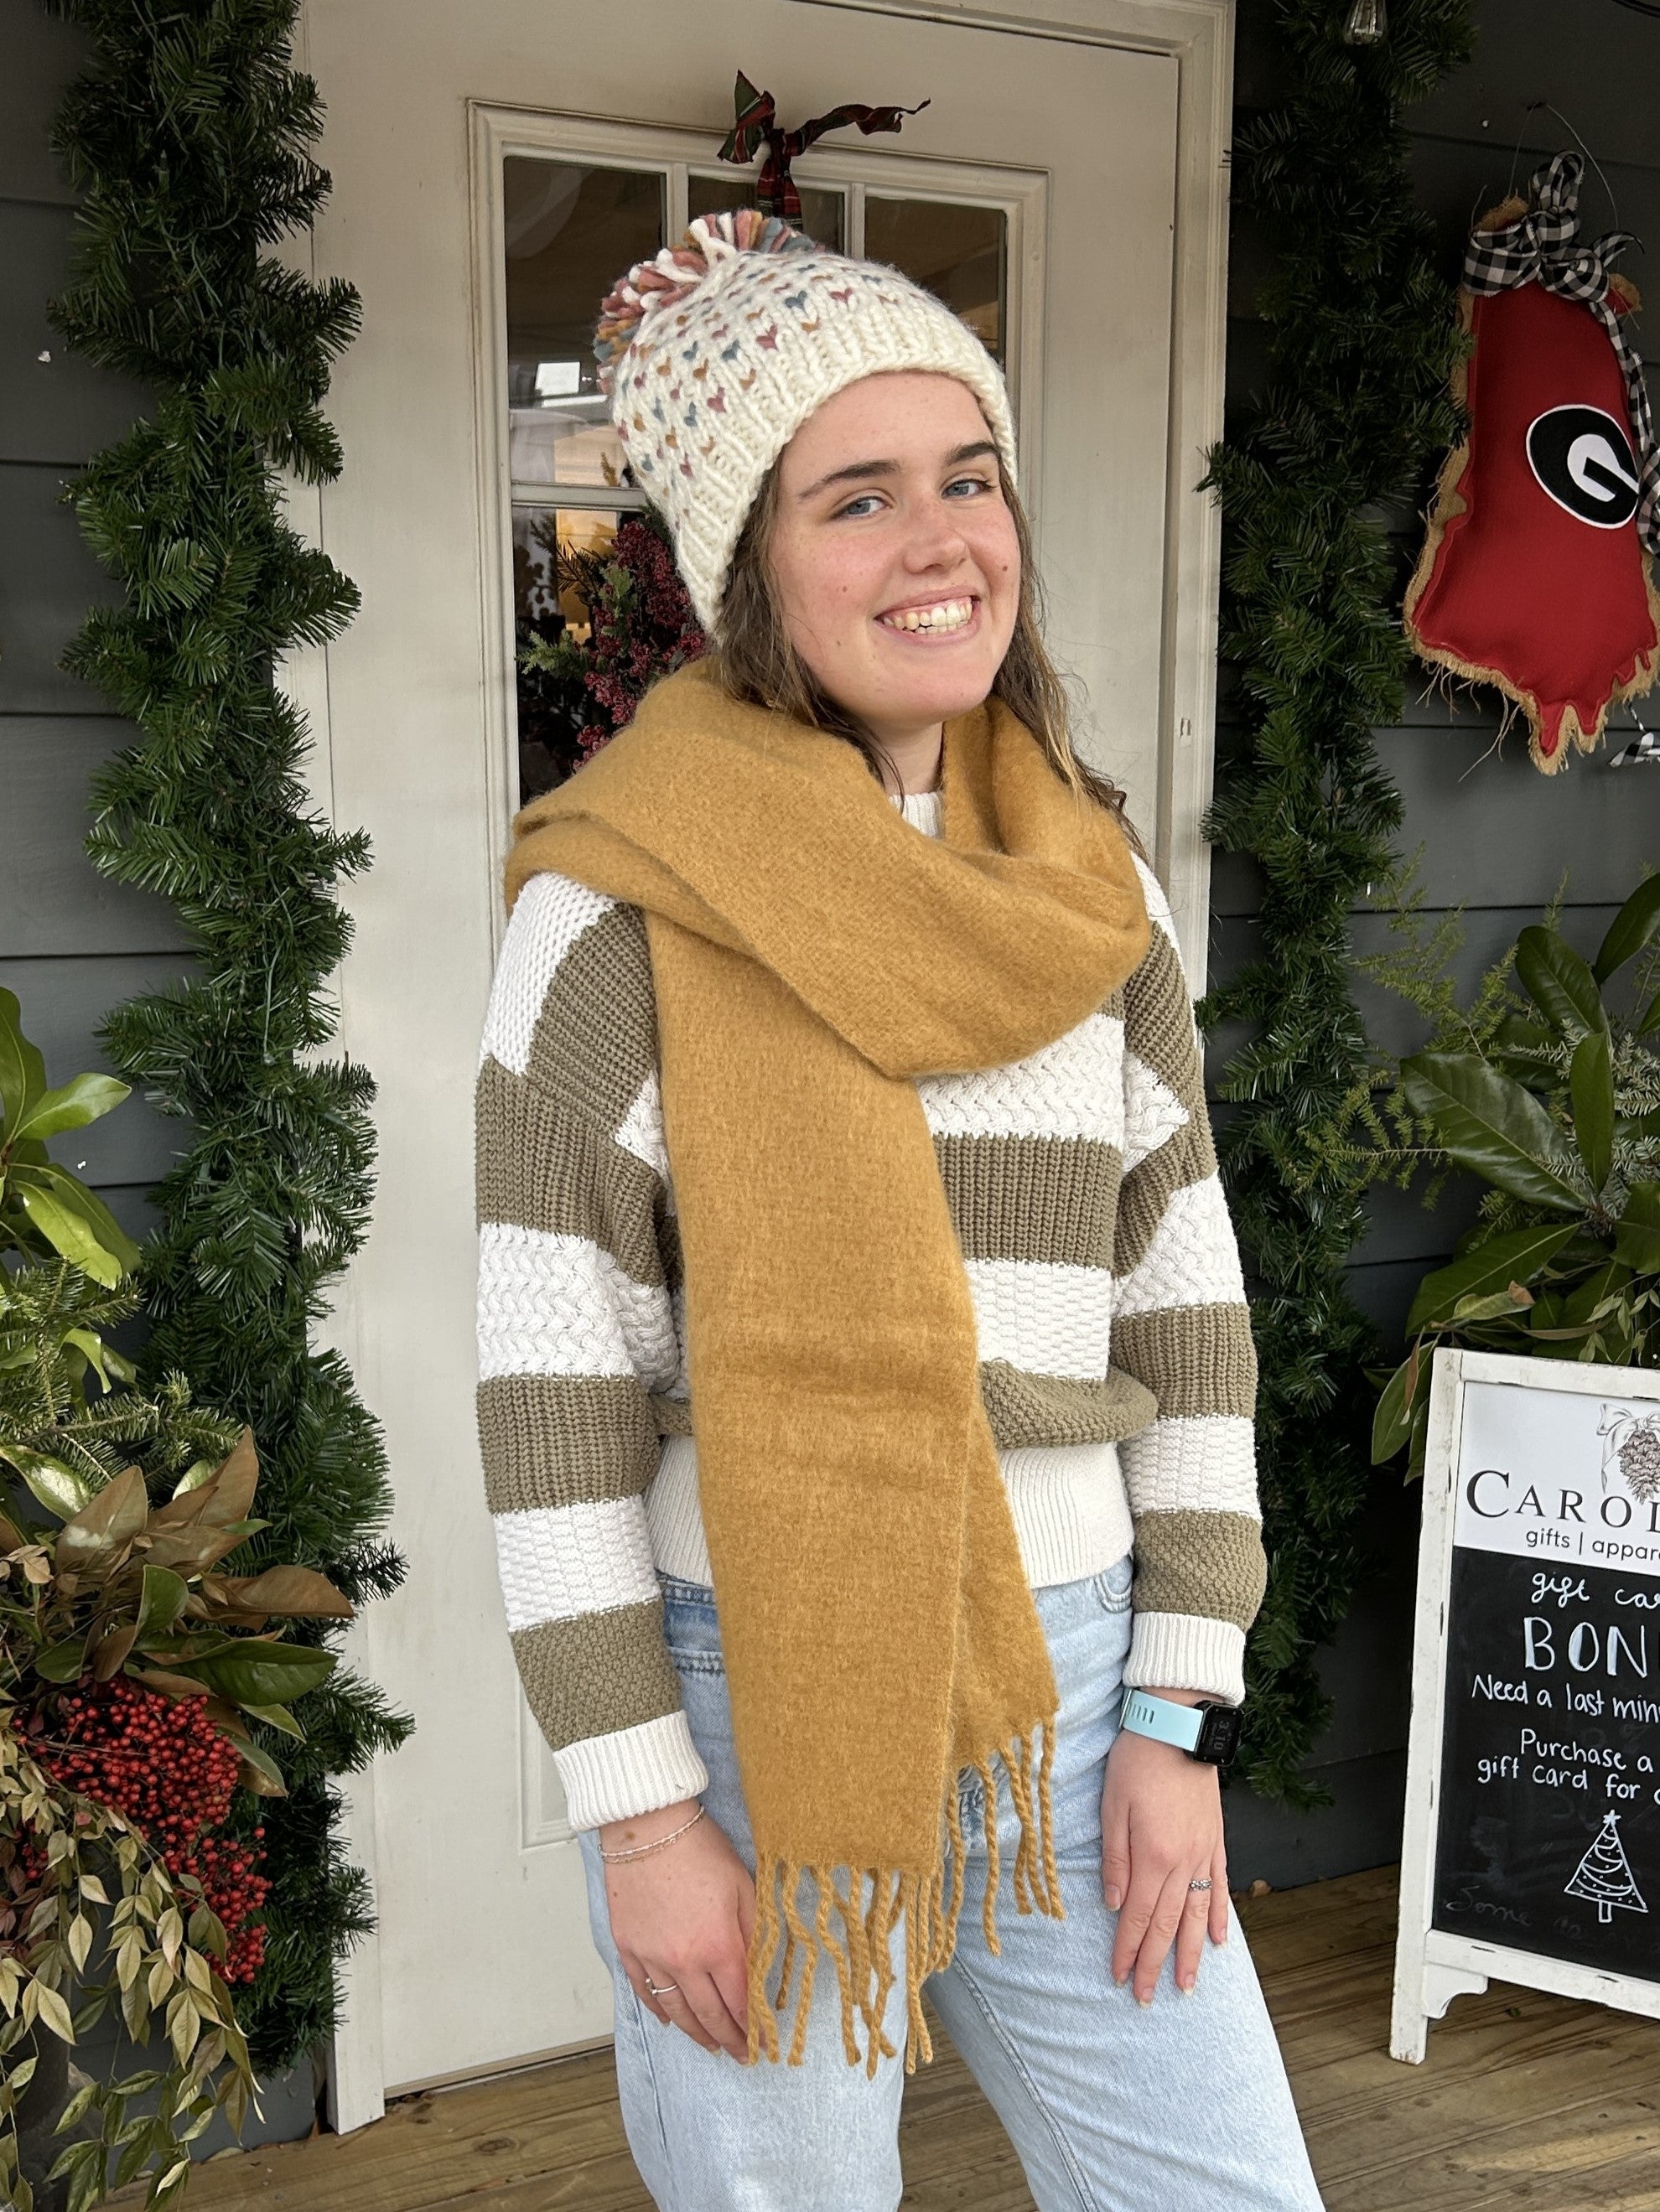 Stay warm and stylish on all your outdoor adventures with our Mini Heart Pompom Beanie! This winter hat features a cream background color with adorable sage and camel hearts, and is lined for extra warmth and comfort. Say goodbye to boring winter accessories and hello to fun and functional fashion!  Material: 100% Acrylic